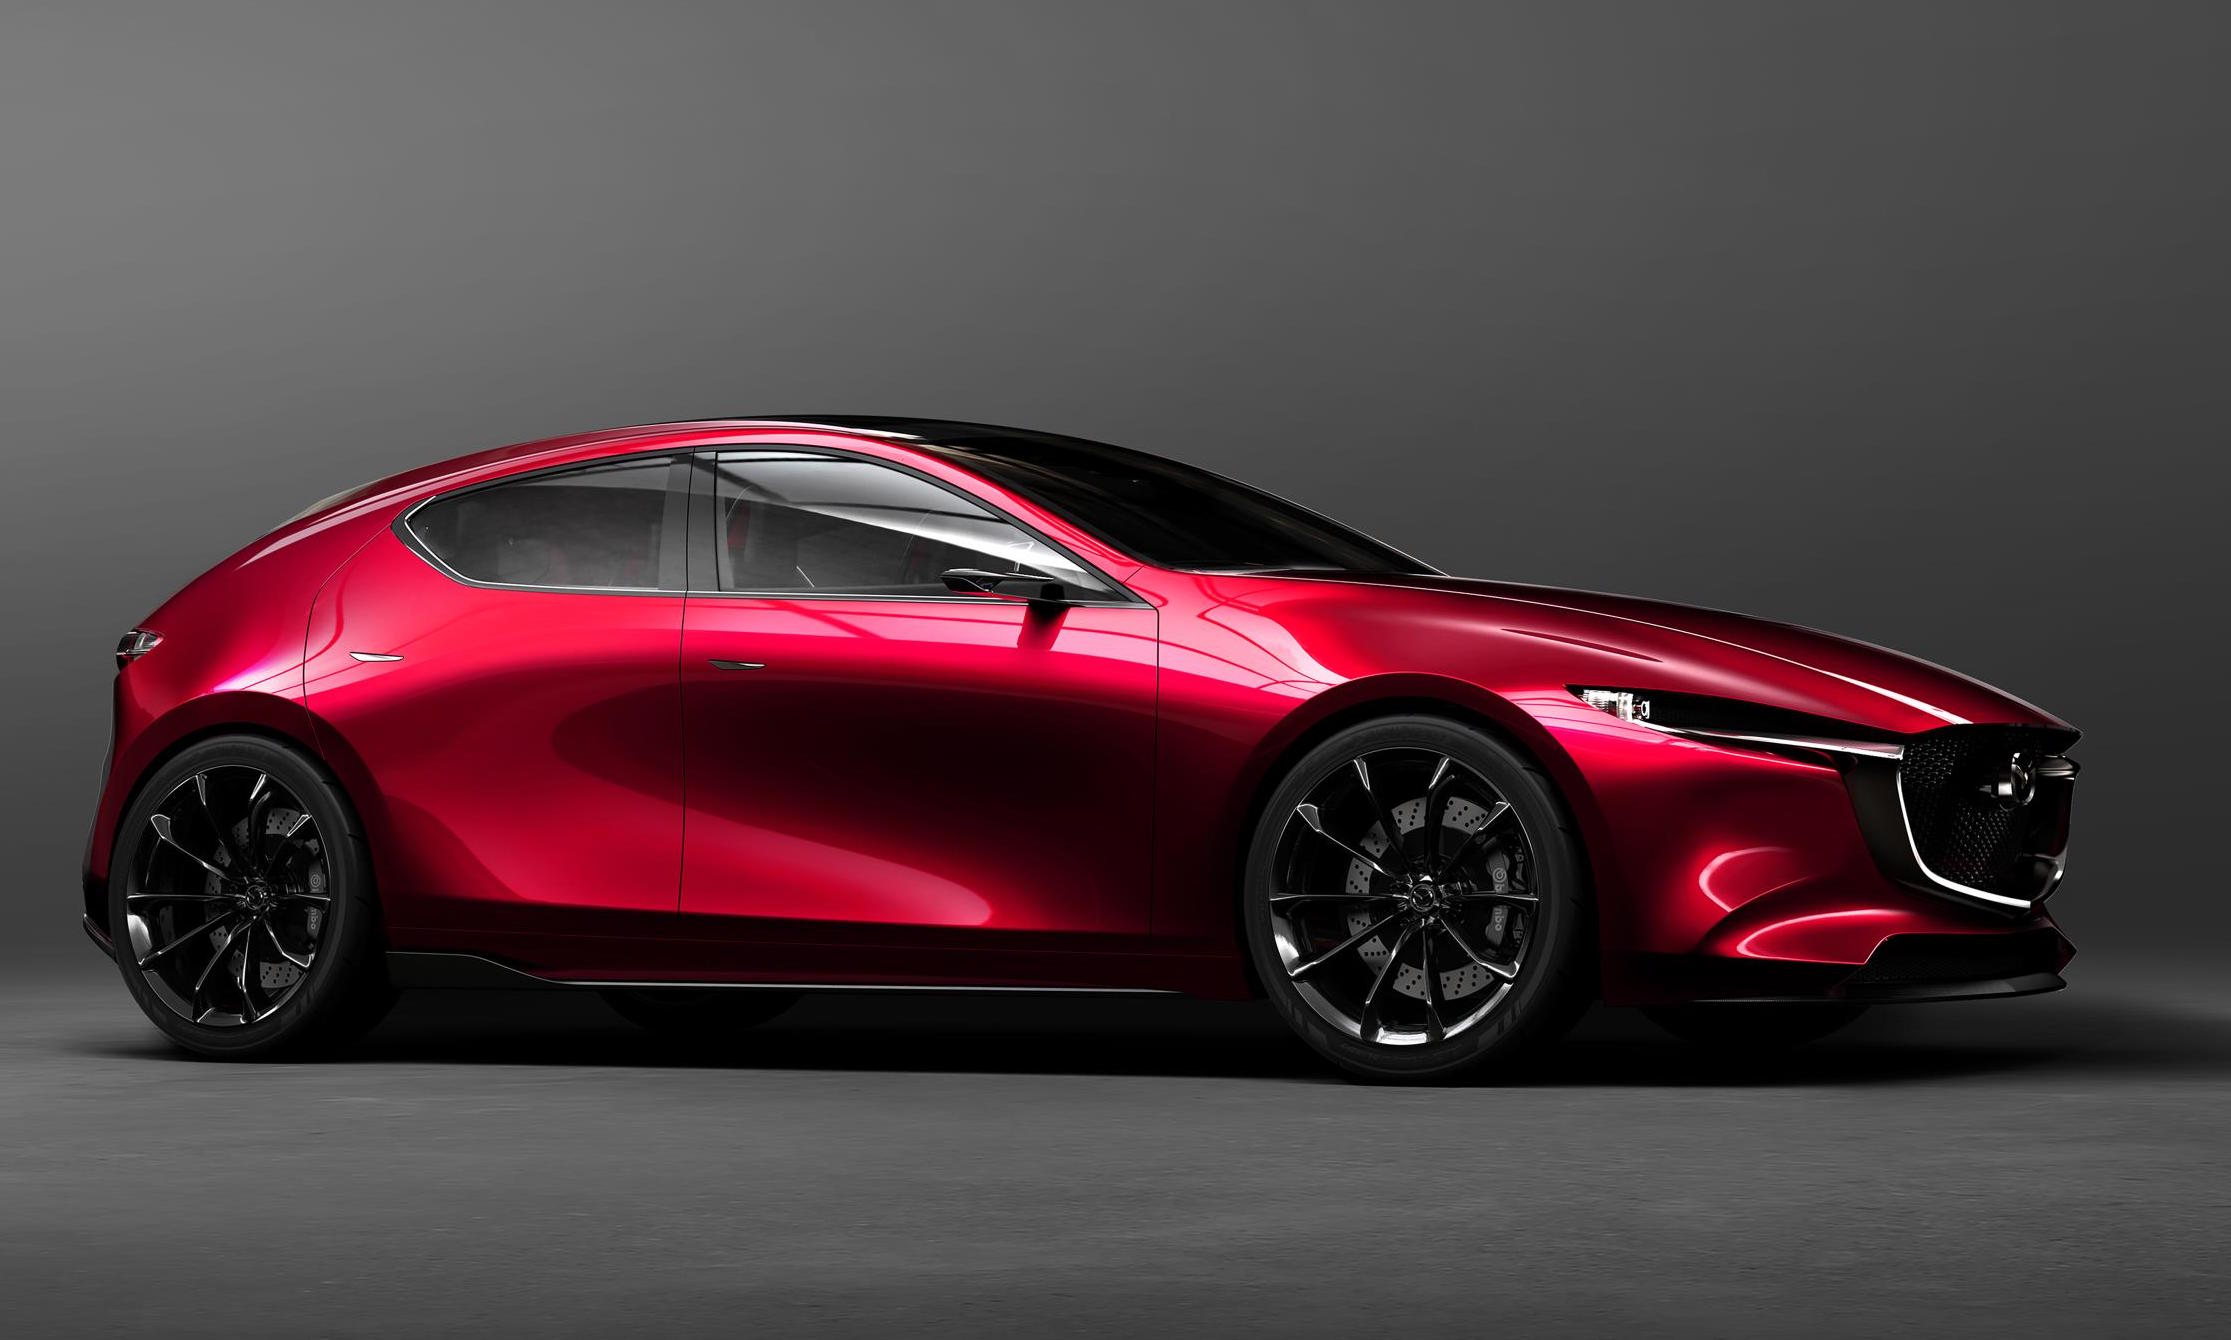 2018 Mazda3 previewed with stunning Kai concept